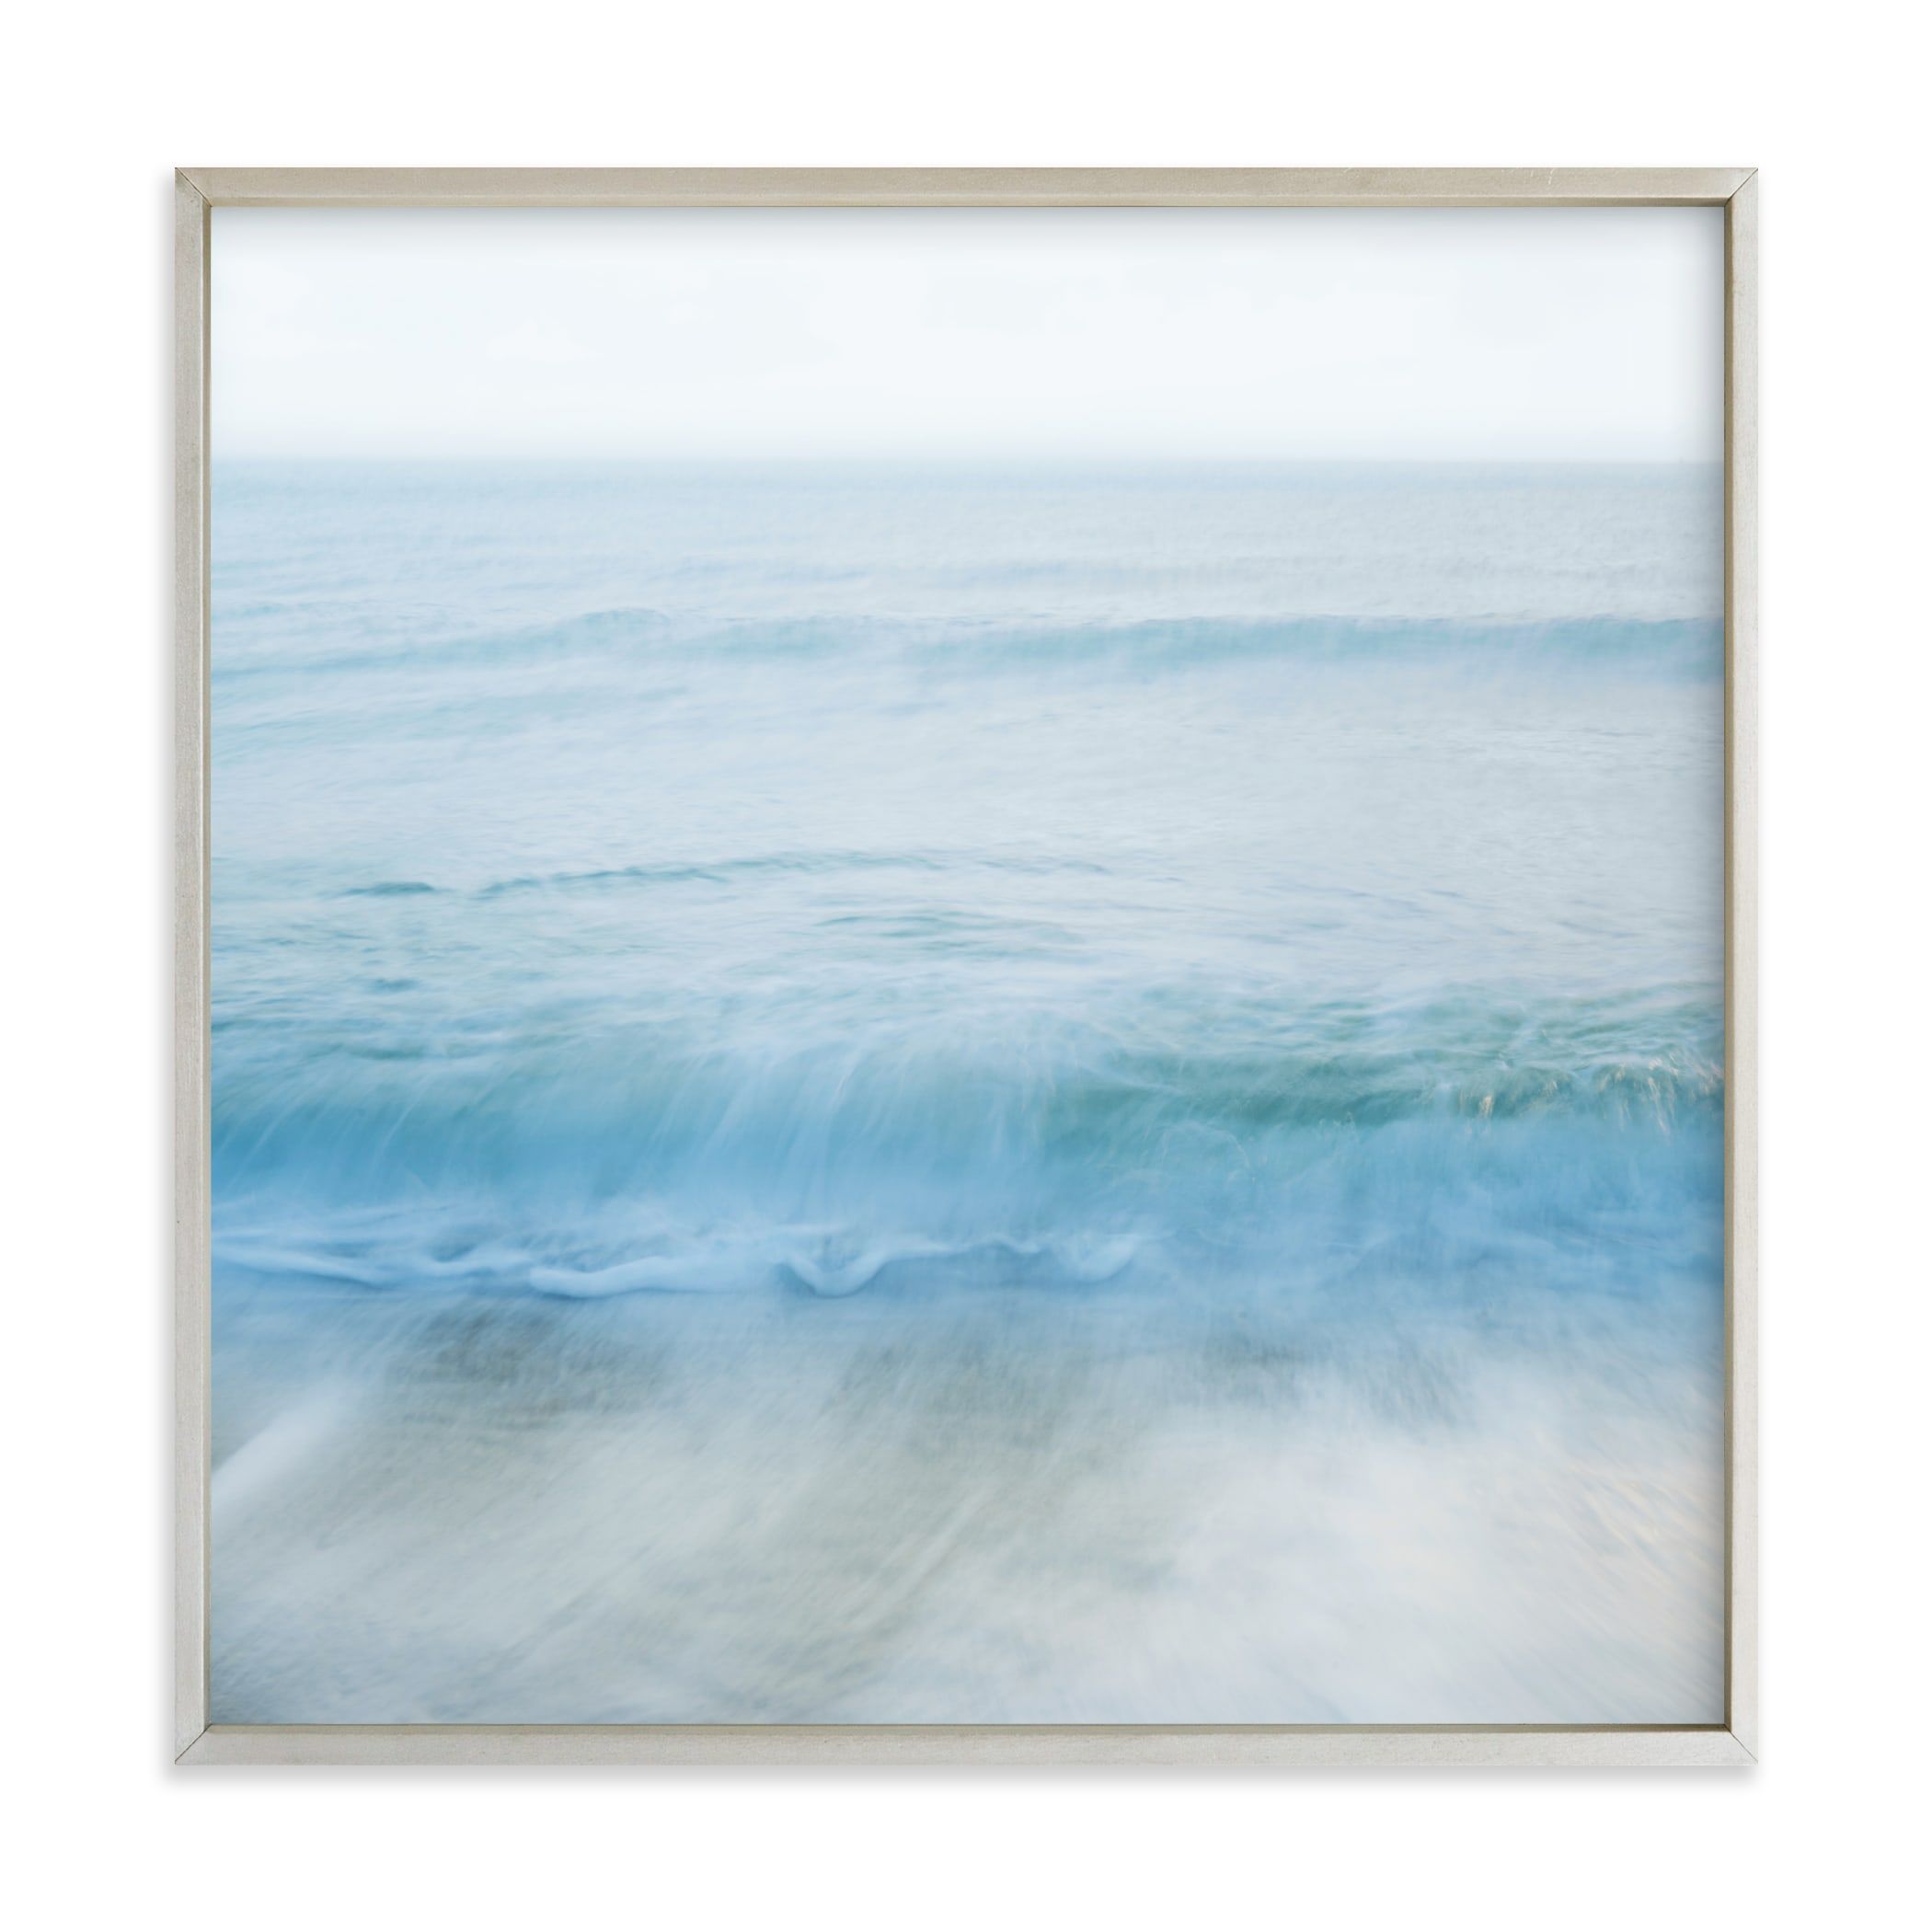 Standing by the ocean, dreaming | Minted